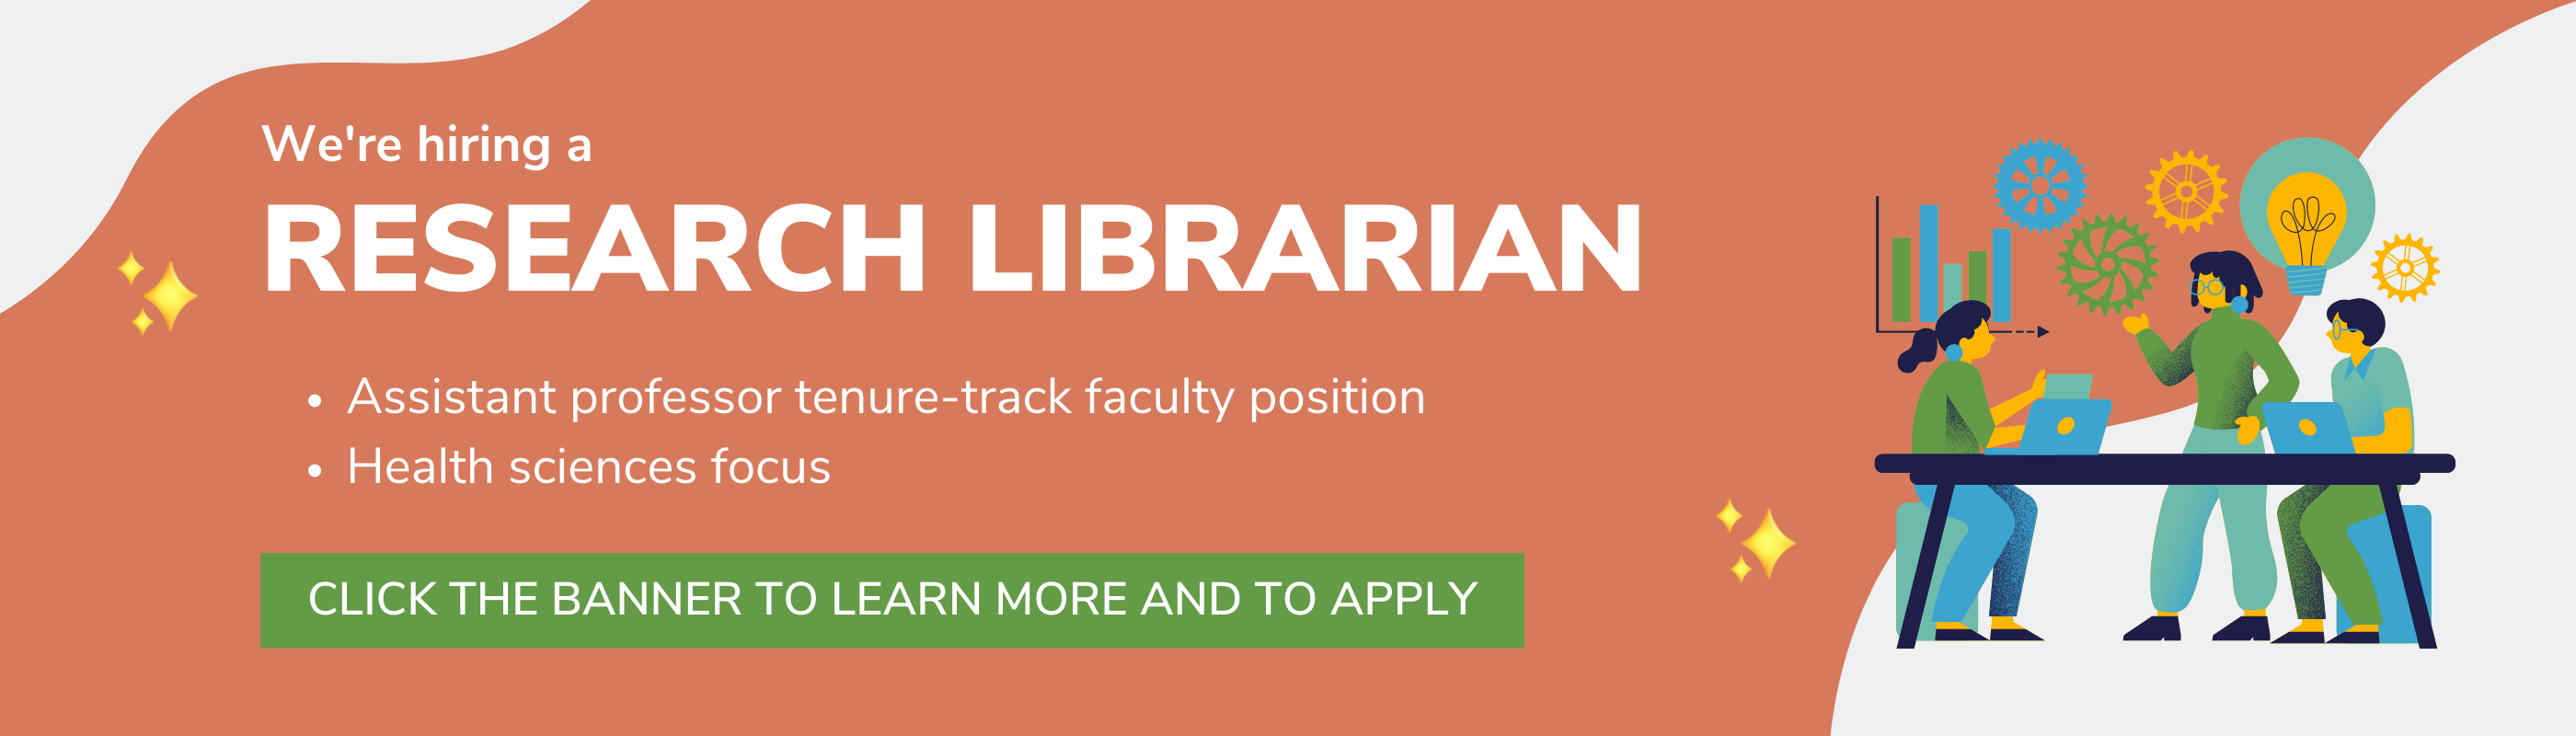 We're Hiring a Research Librarian! Click on the banner to learn more and to apply.